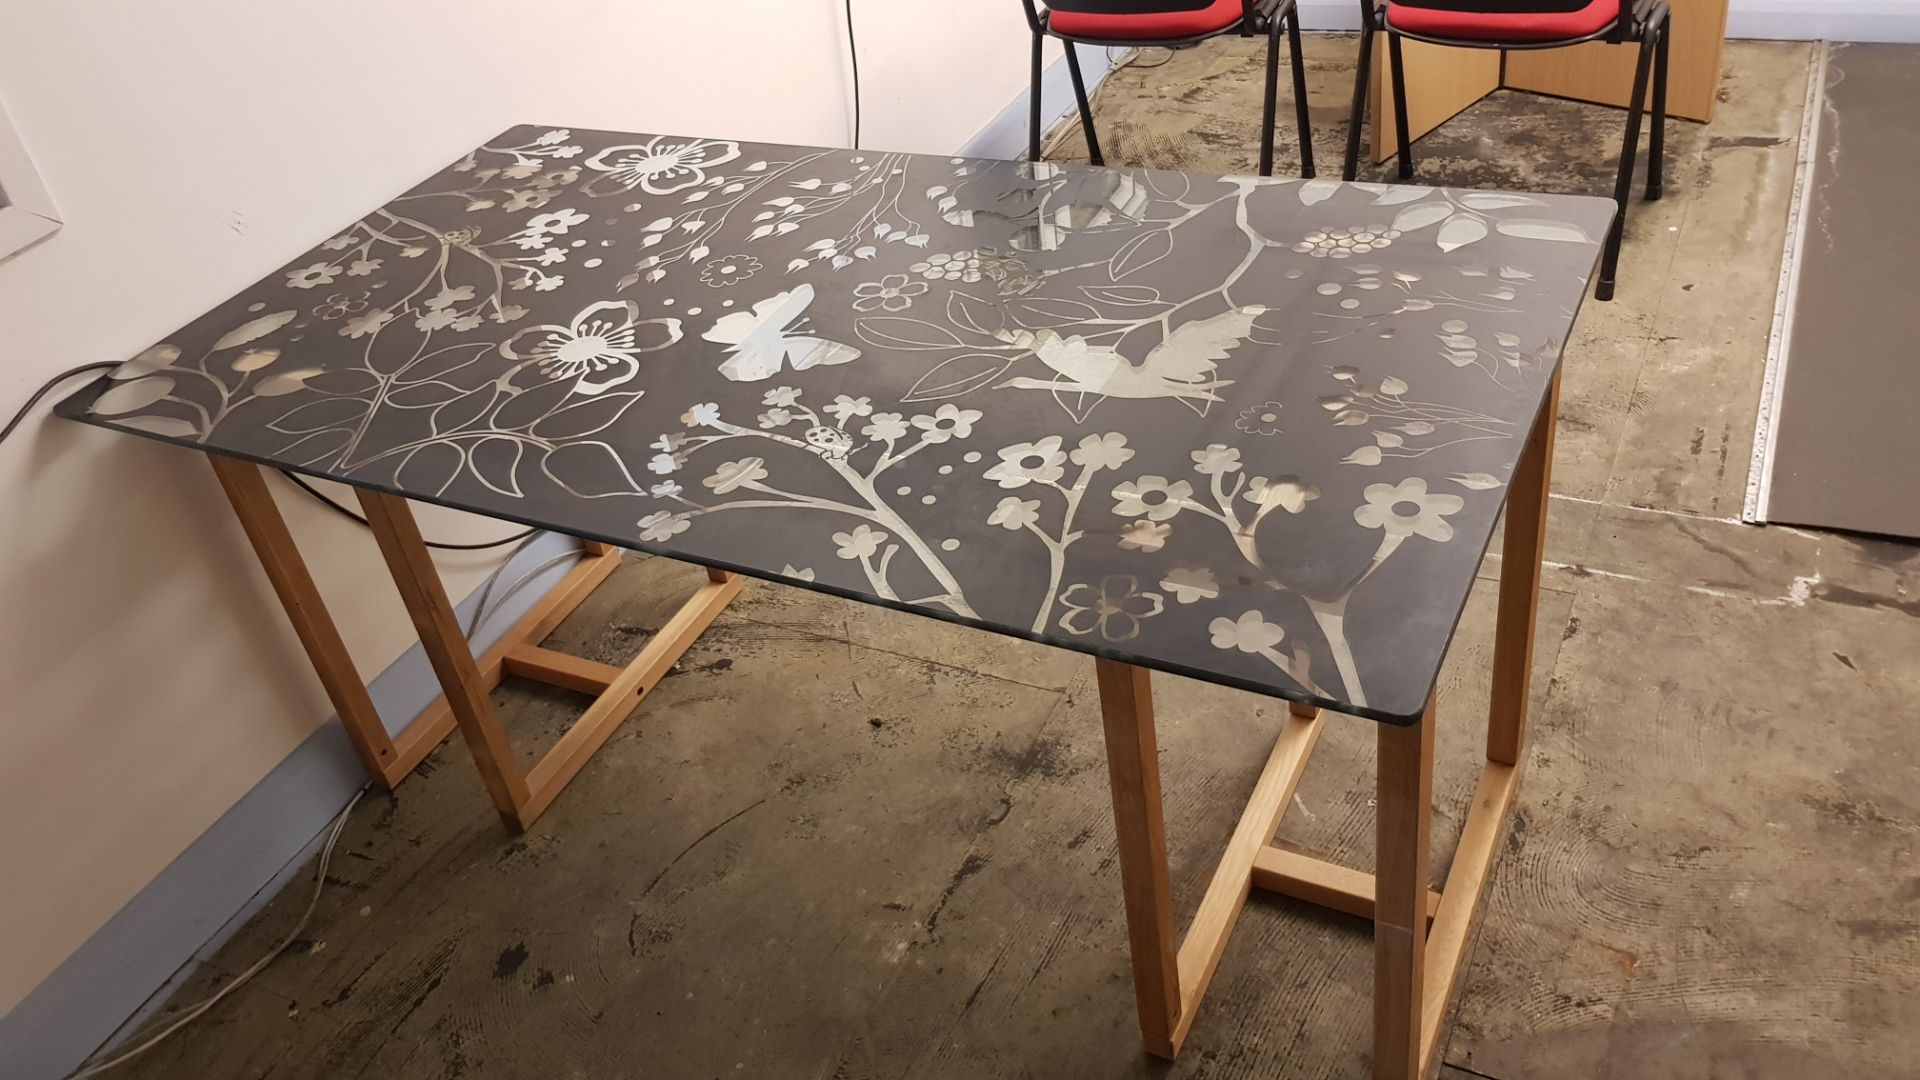 1x Decorative Floral Black Glass Table Top With Wooden Legs. (W150x D80x H72cm) - Image 2 of 4